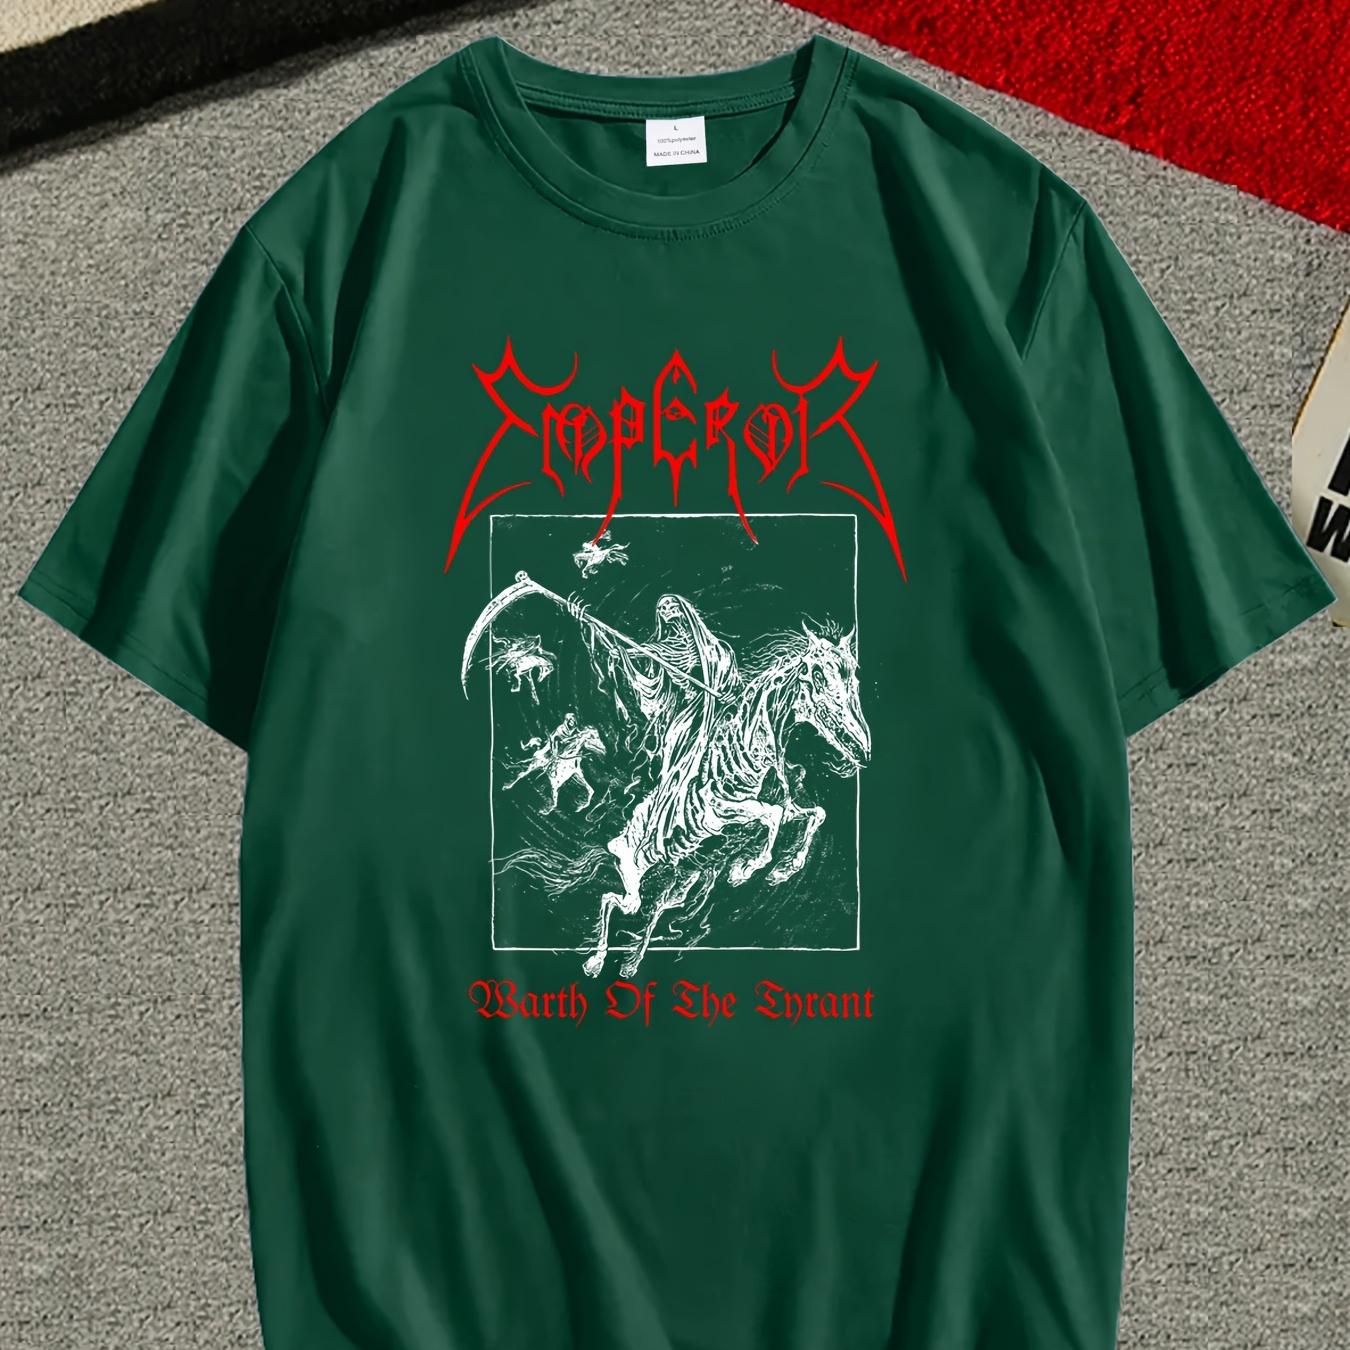 

Grim Reaper On A Horse Print Tee Shirt, Tees For Men, Casual Short Sleeve T-shirt For Summer